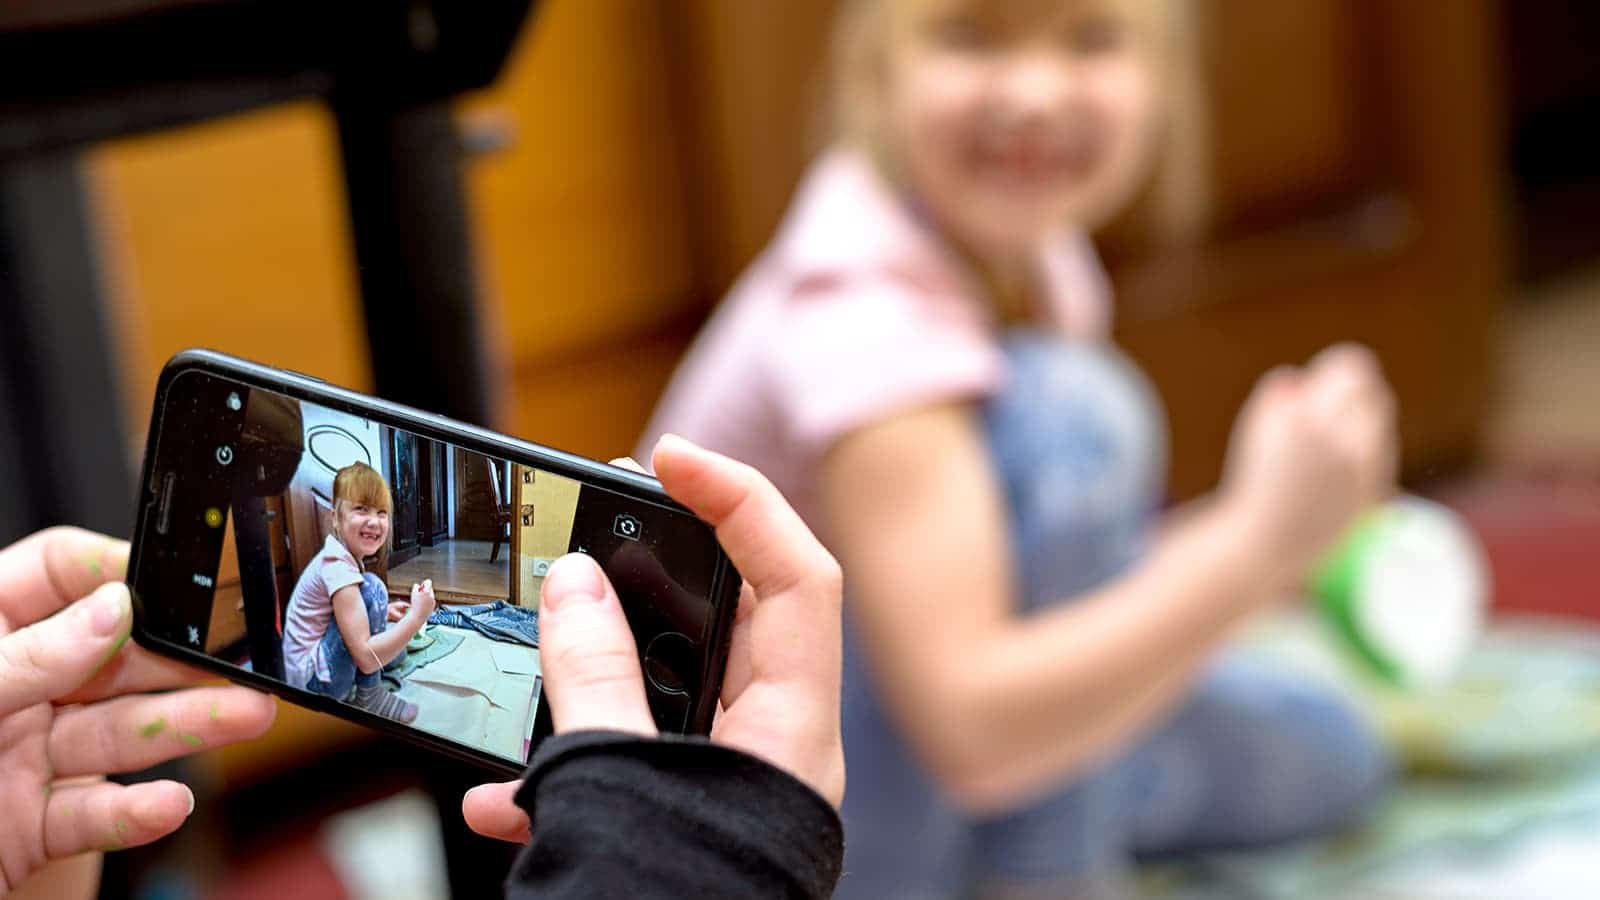 Researchers Reveal Why Posting Pictures of Your Kids Can Be Dangerous